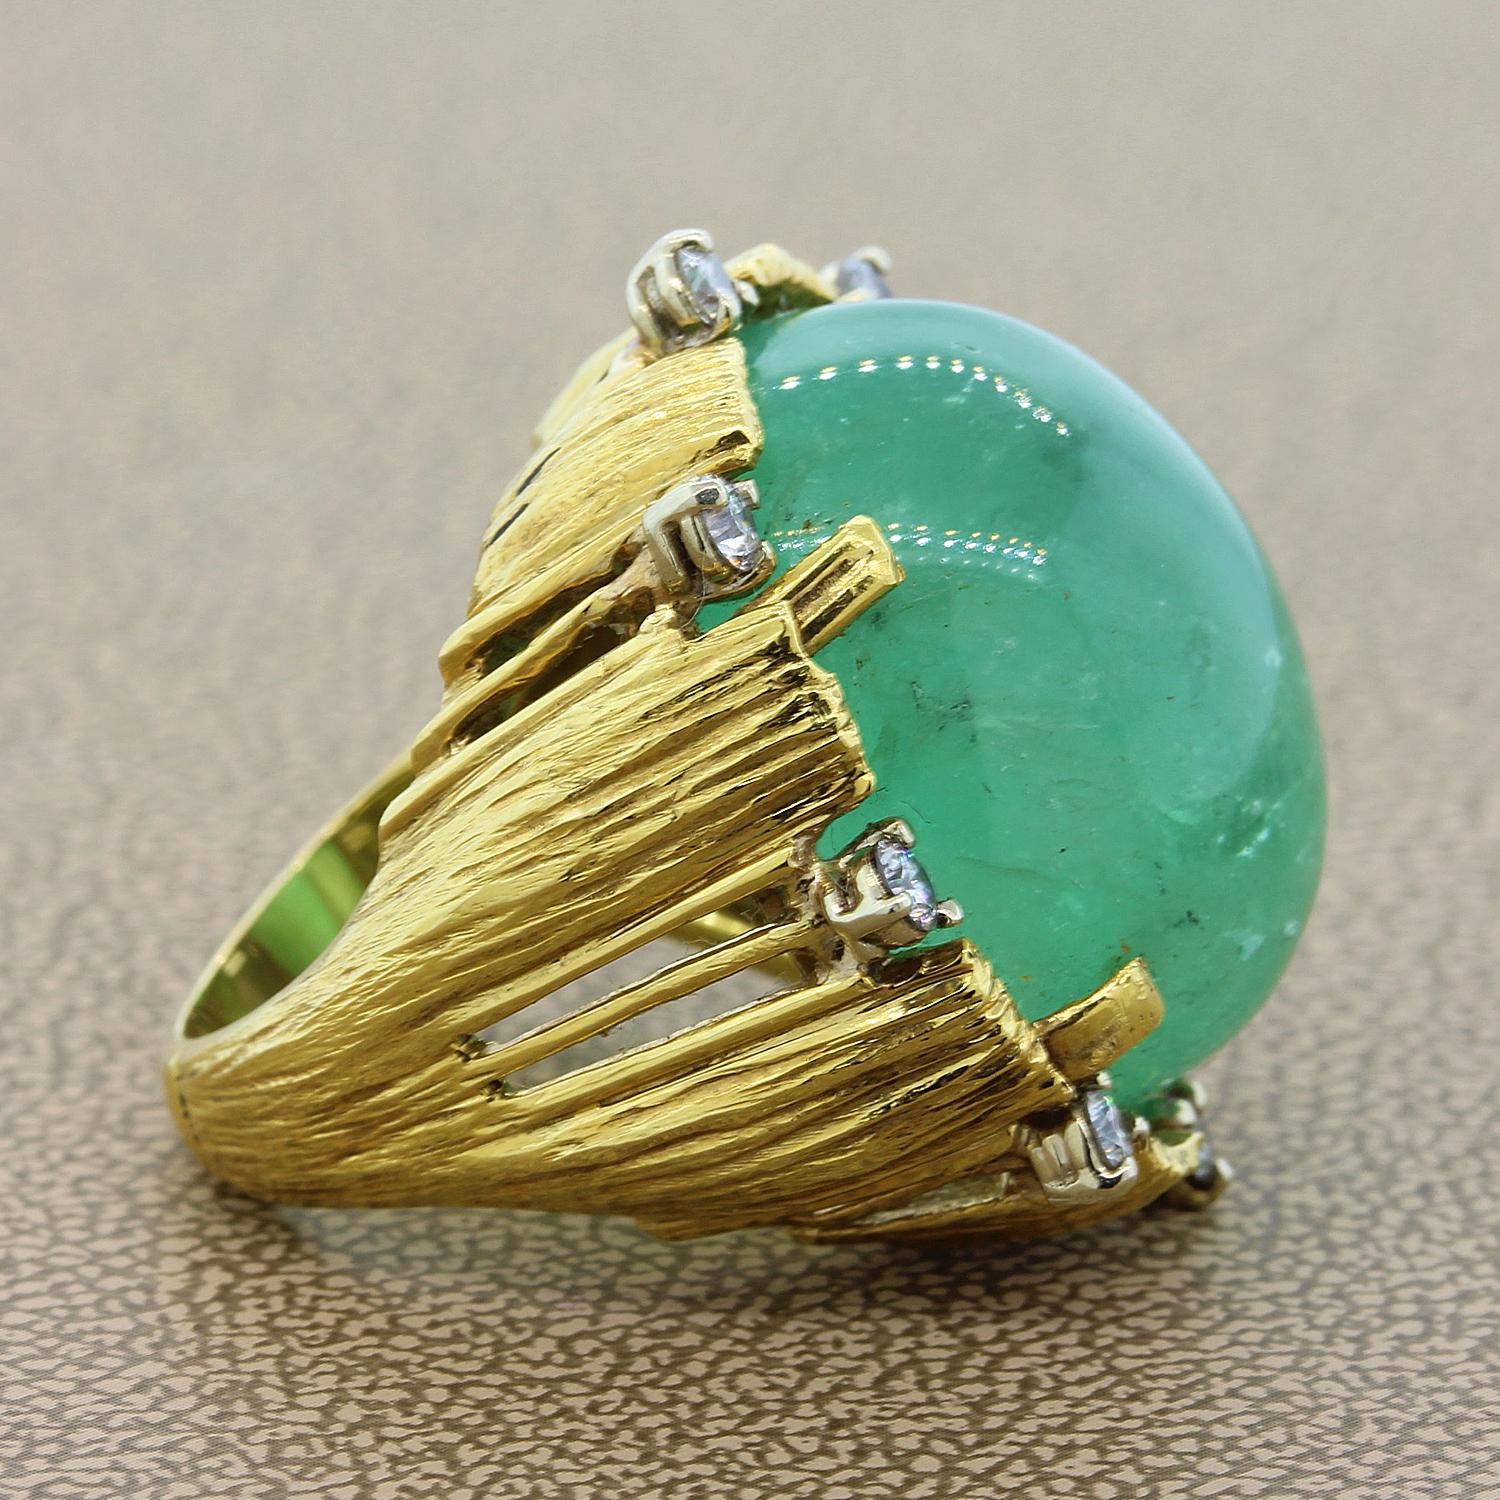 An estate cocktail ring featuring a large cabochon emerald weighting approximately 35 carats. The emerald is accented by 0.25 carats of round cut diamonds. The gems are set in a 18K yellow gold basket setting.

Size 5 ¼ 
